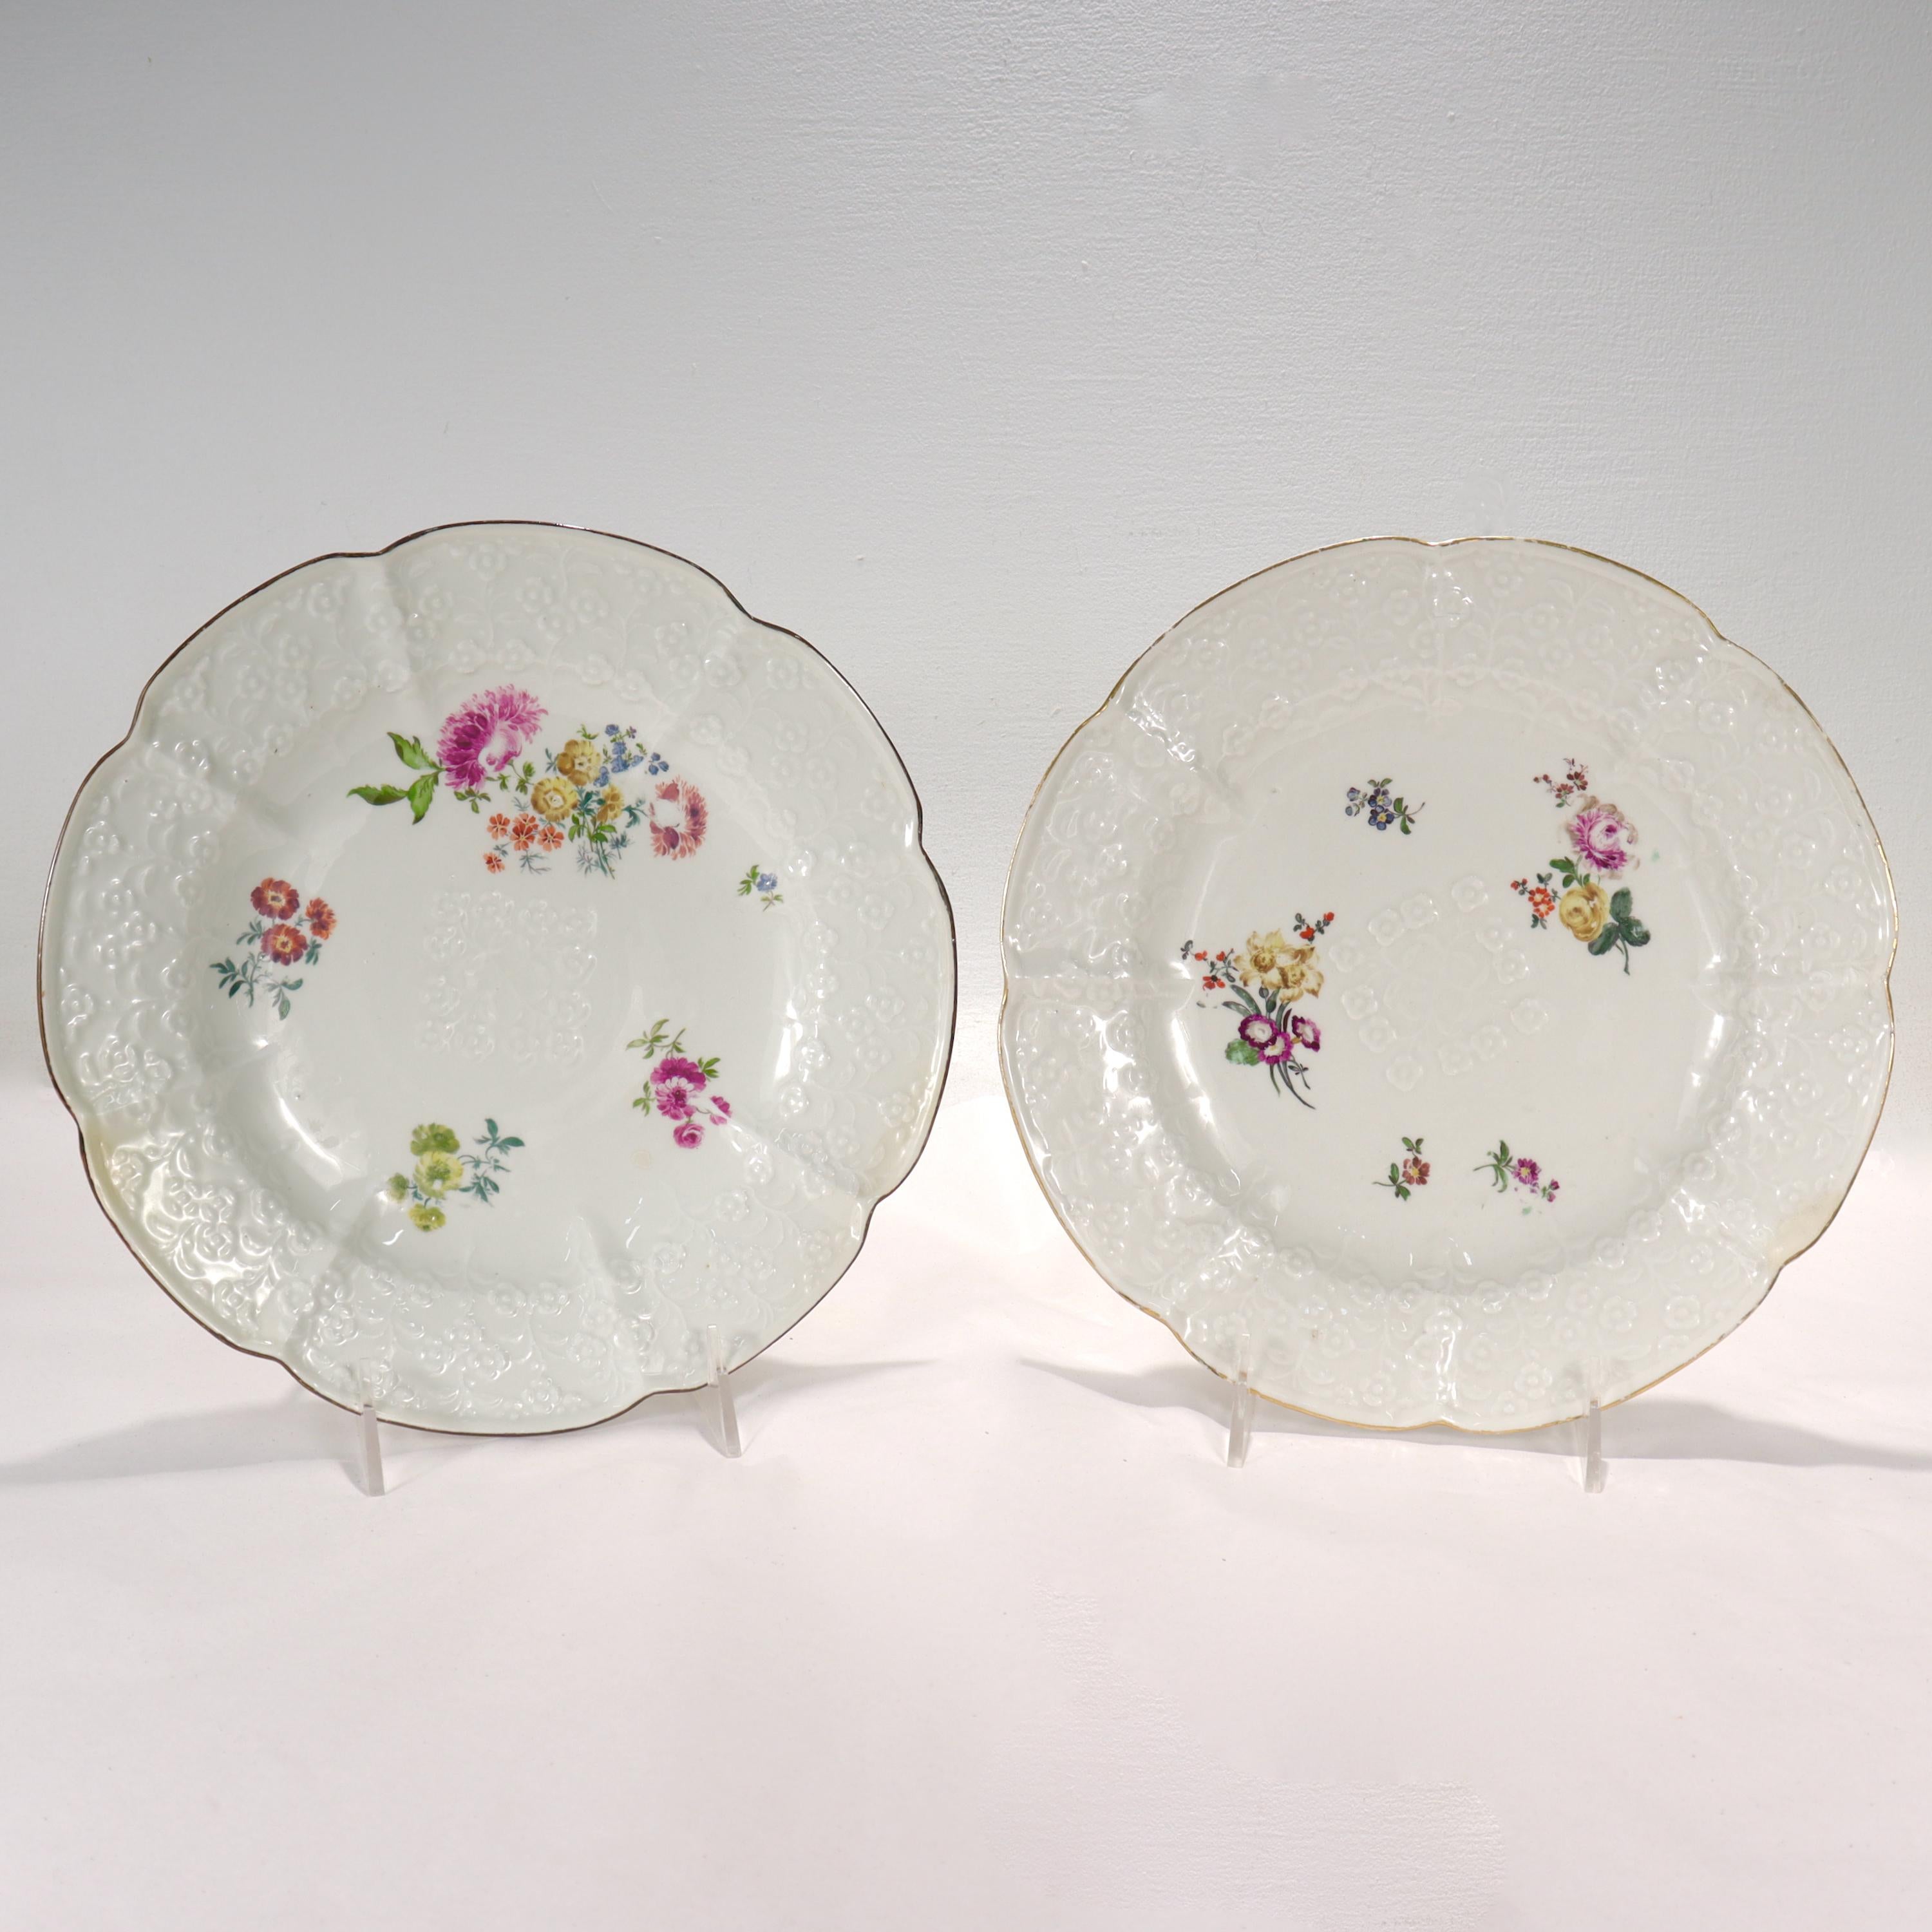 A fine pair of antique Vergiss Meinnicht (Forget-me-not) pattern plates.

By the Royal Meissen Porcelain Manufactory.

Decorated with Deutsche Blumen floral sprays to the center including various flowers & molded floral motif to the center. 

The